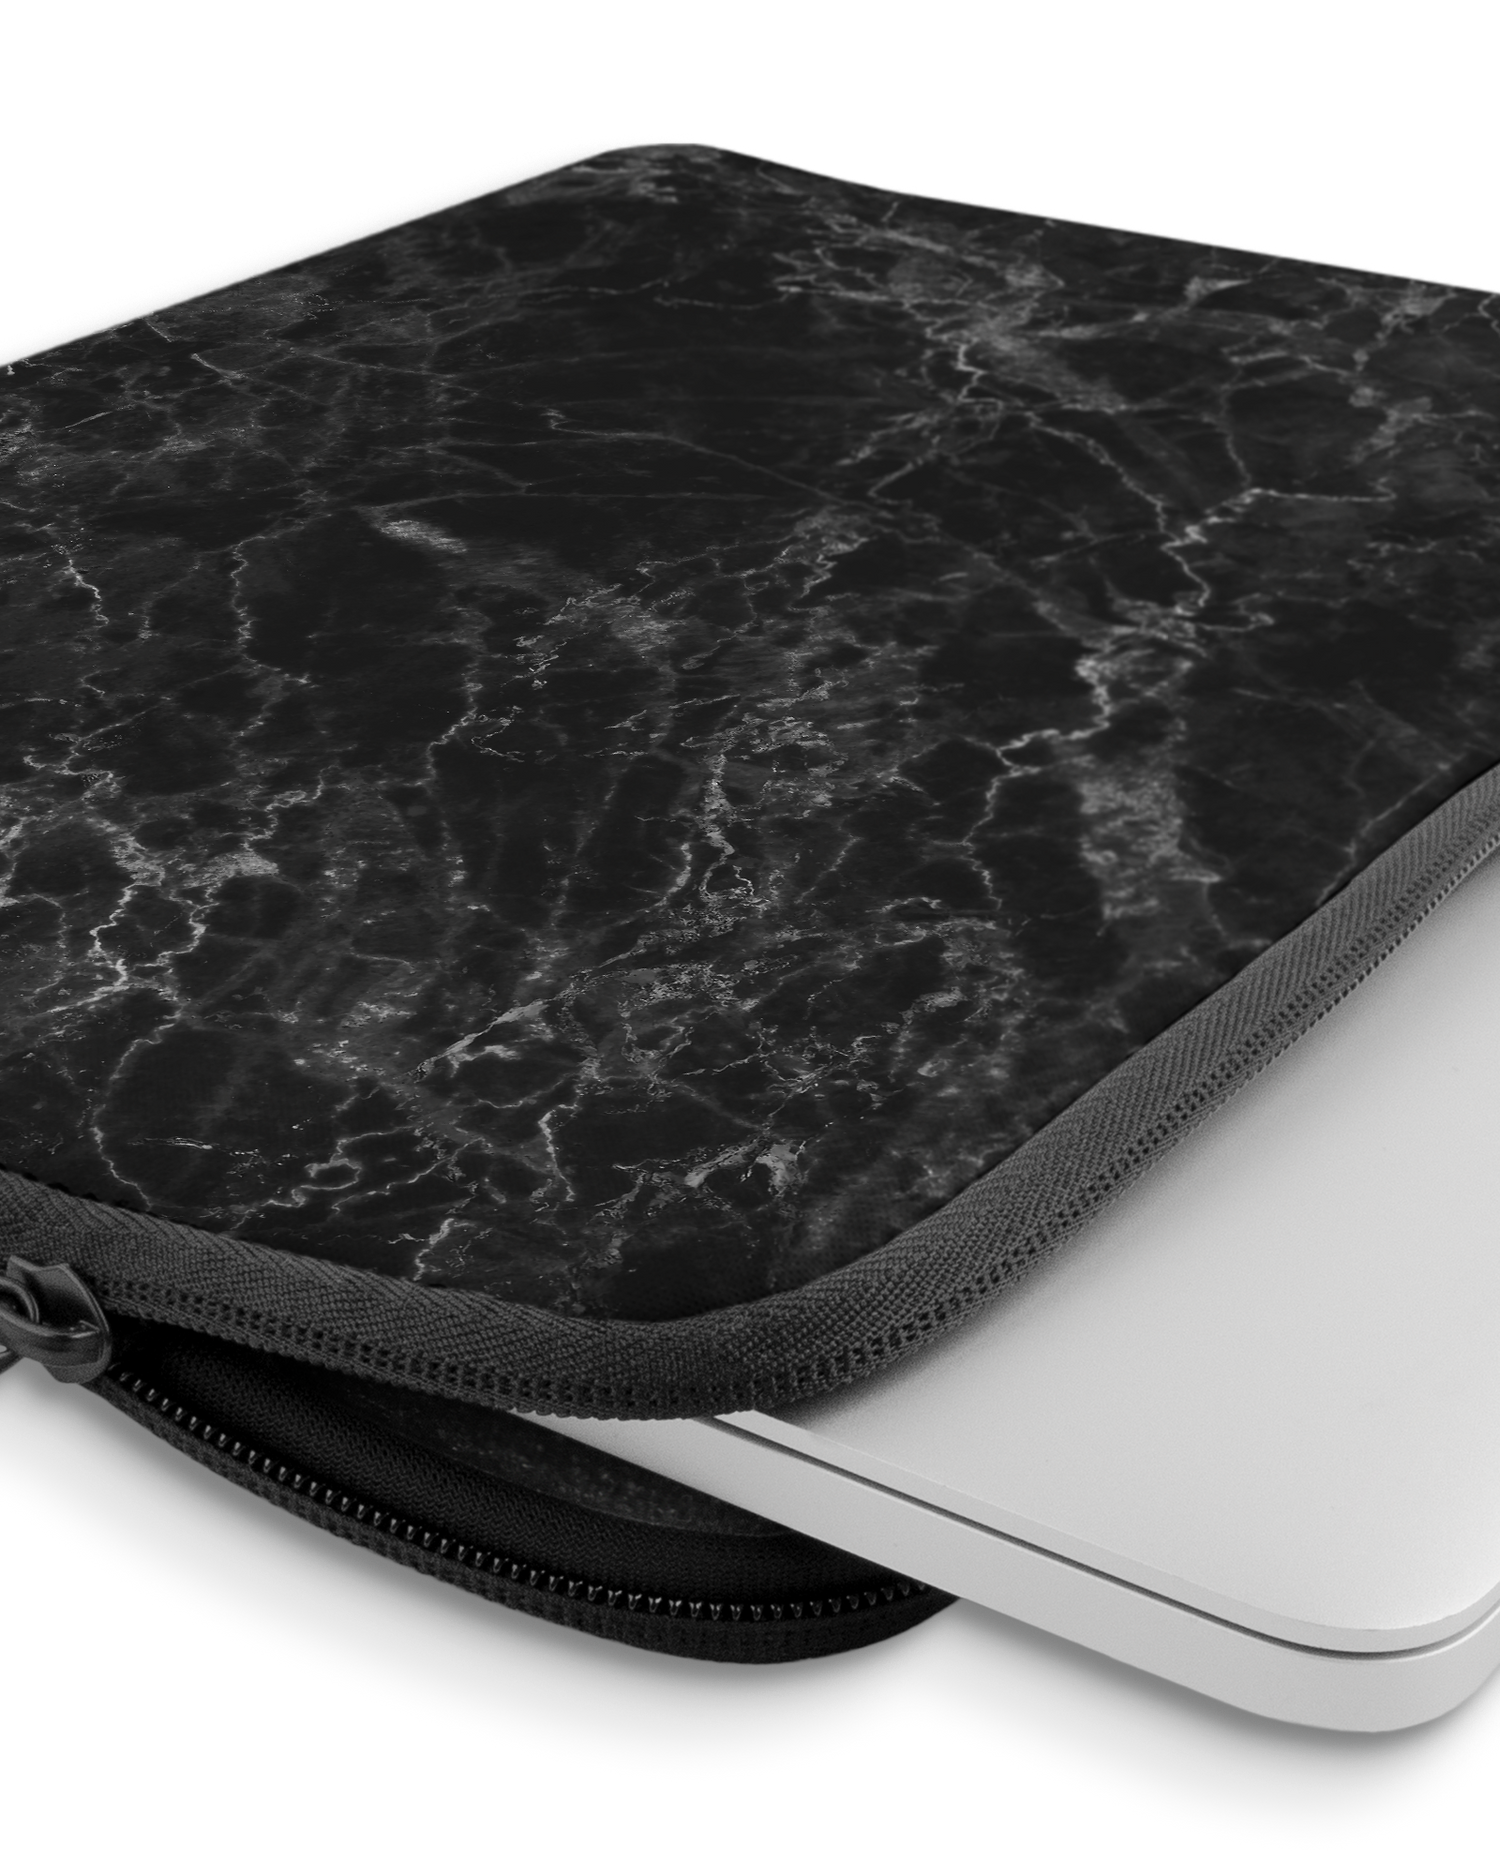 Midnight Marble Laptop Case 13-14 inch with device inside